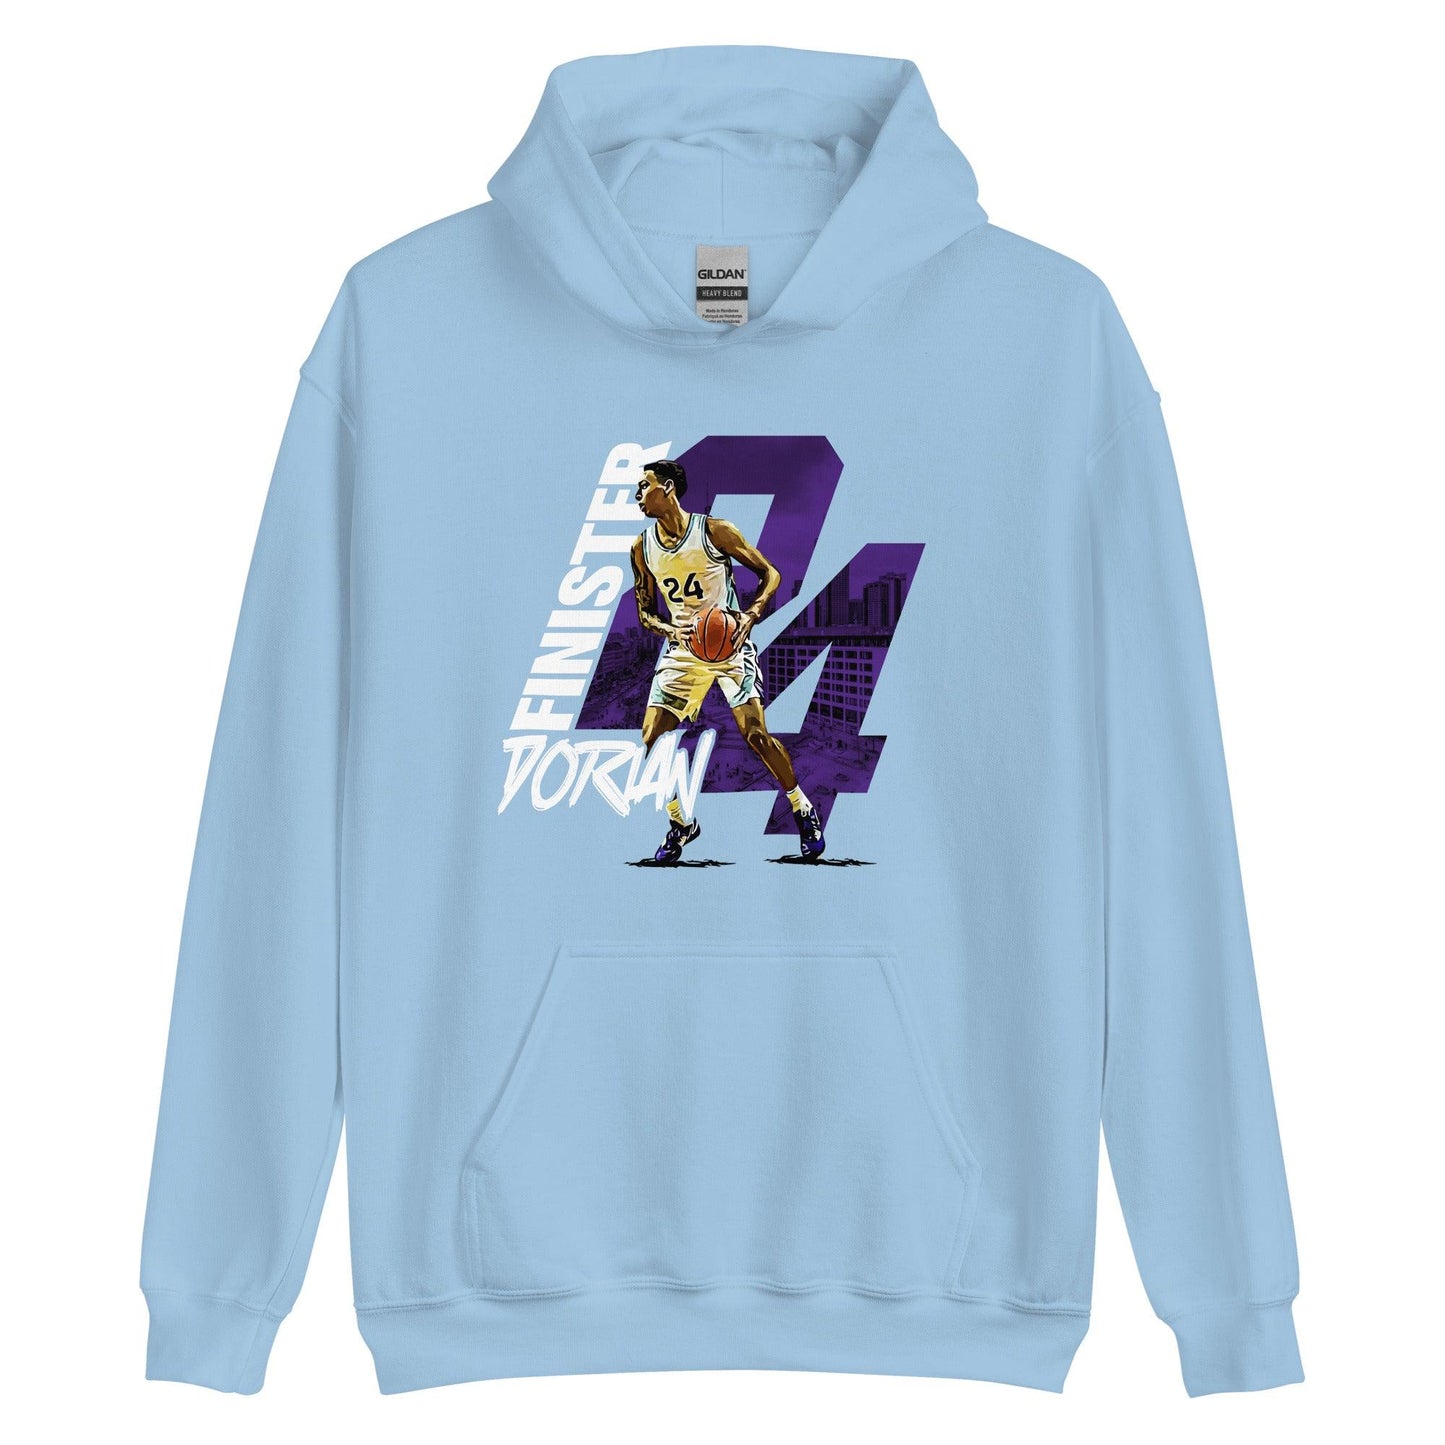 Dorian Finister "Gameday" Hoodie - Fan Arch